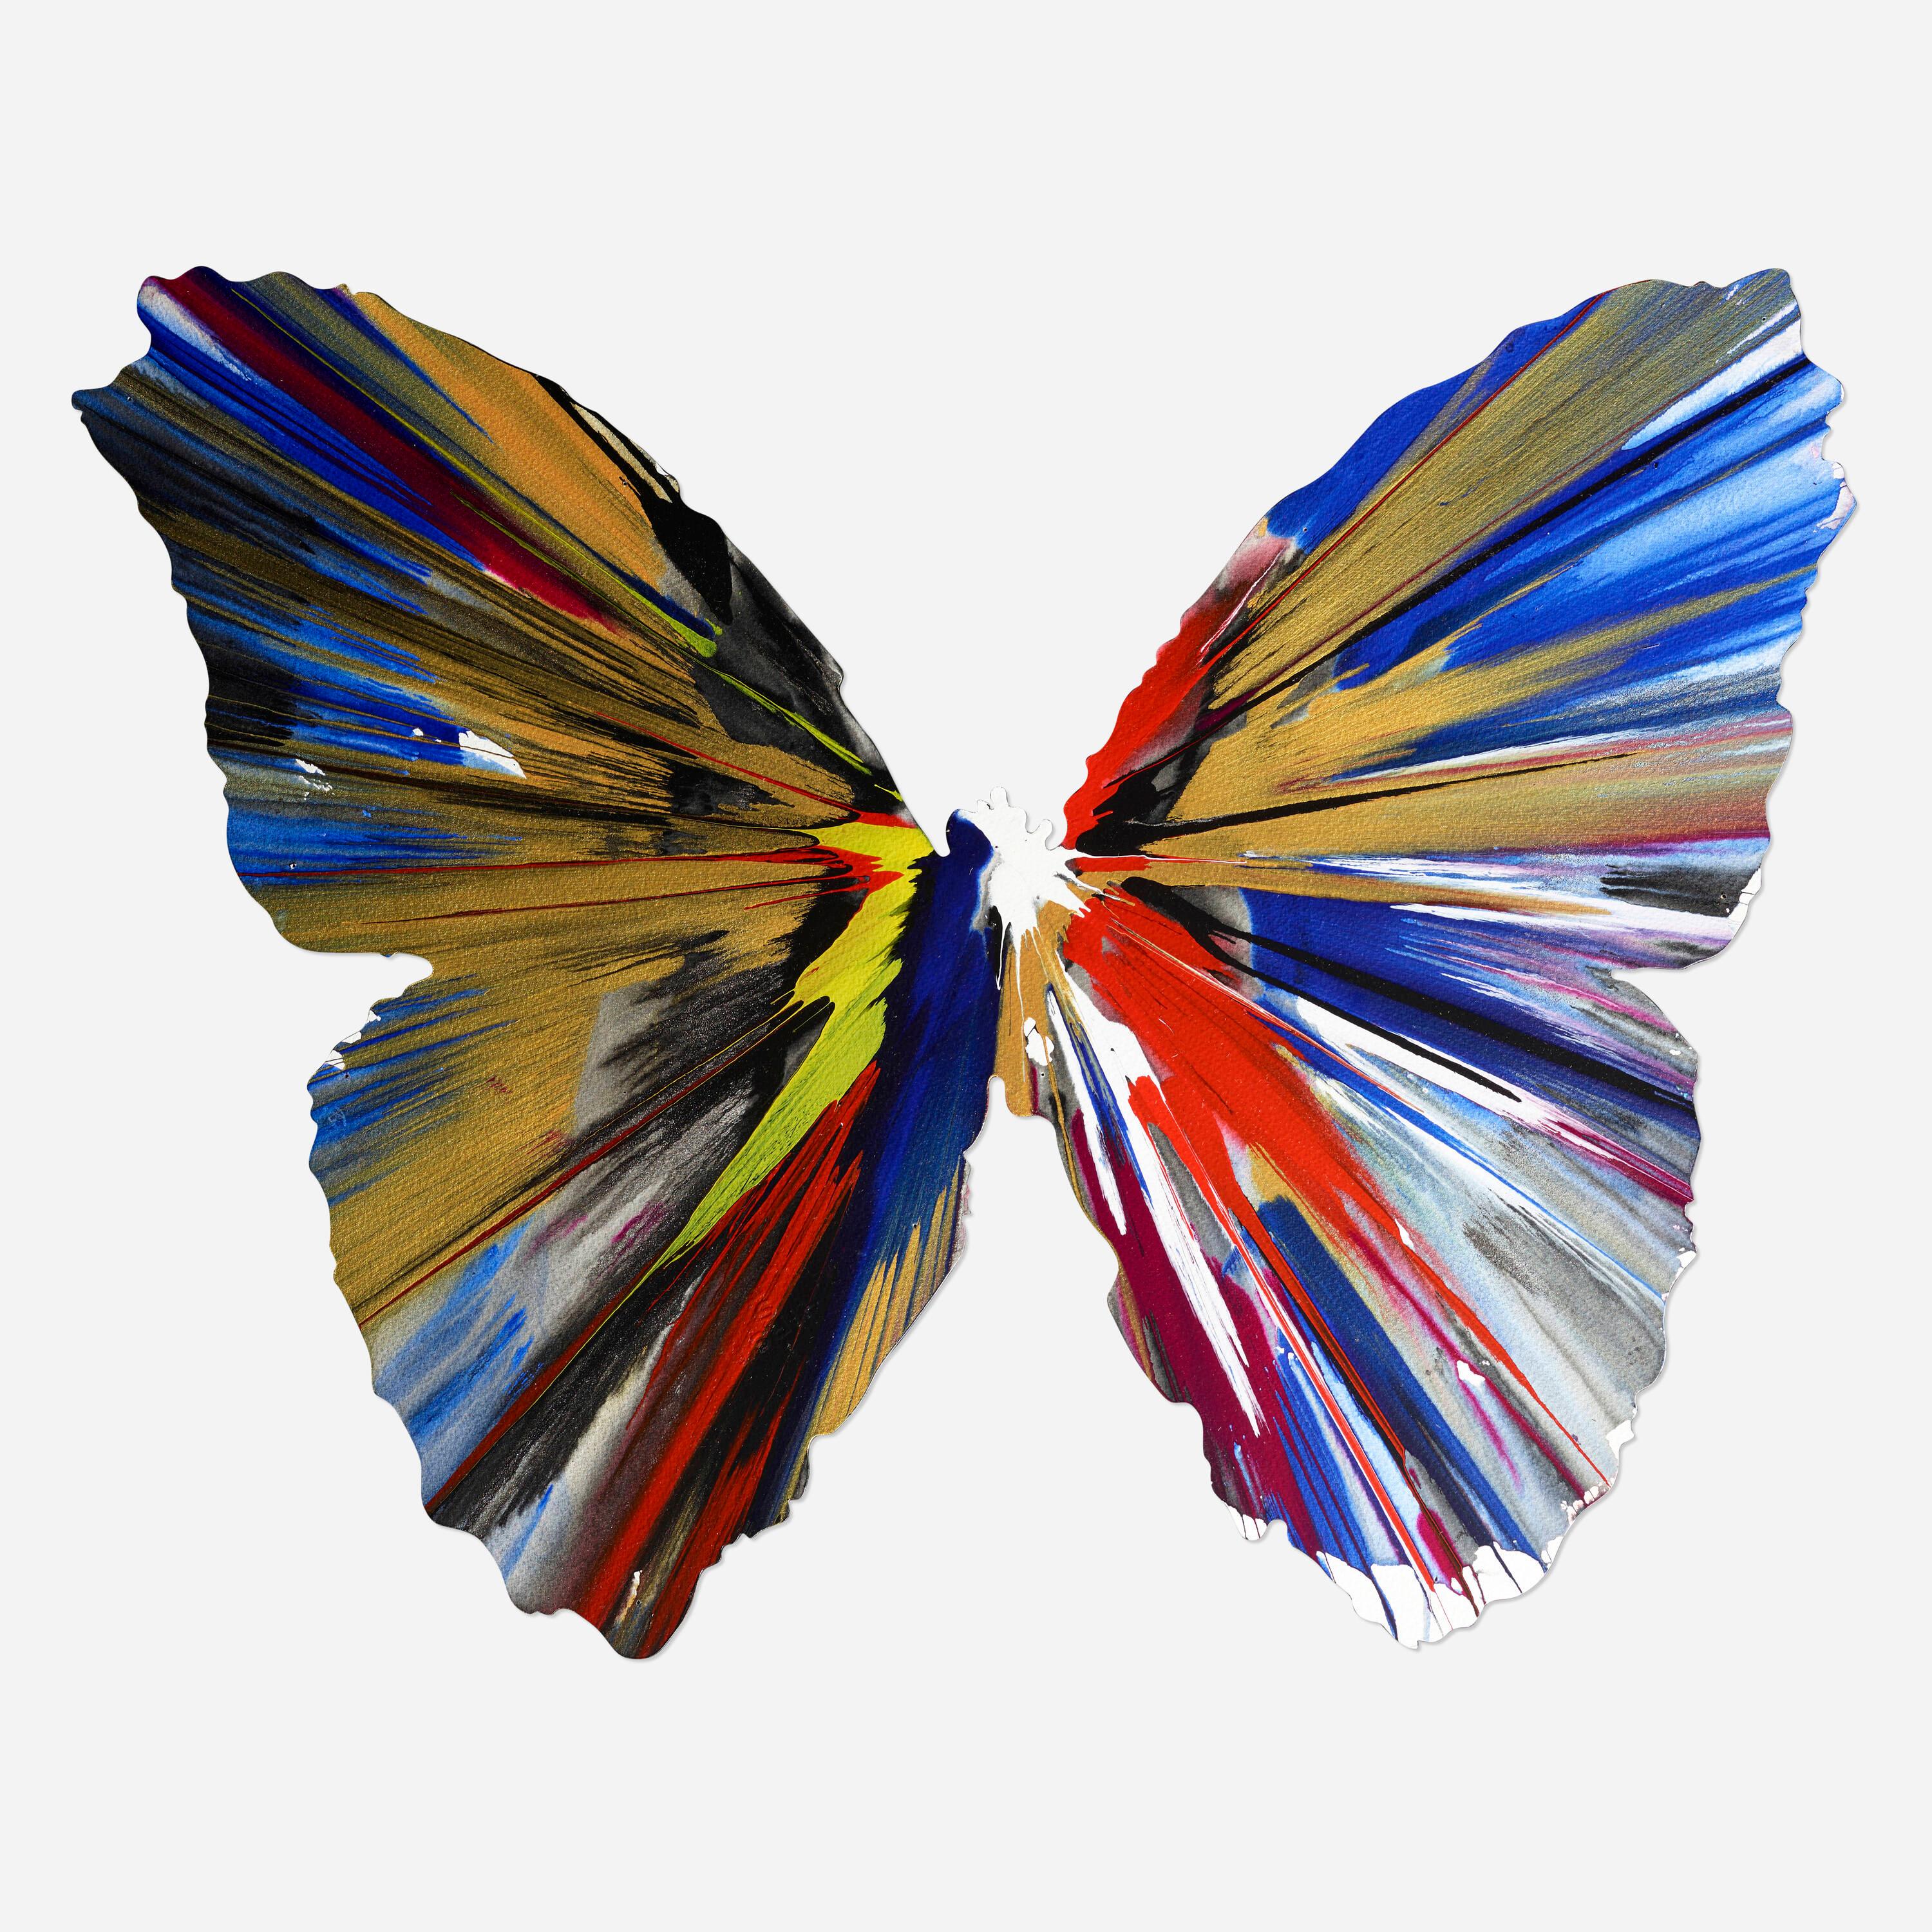 This is an original painting by Damien Hirst, created with public collaboration at the Damien Hirst Spin Workshop to celebrate the opening of Requiem at the PinchukArt Centre, Ukraine.
The painting, cut out in the shape of the butterfly bears Hirst